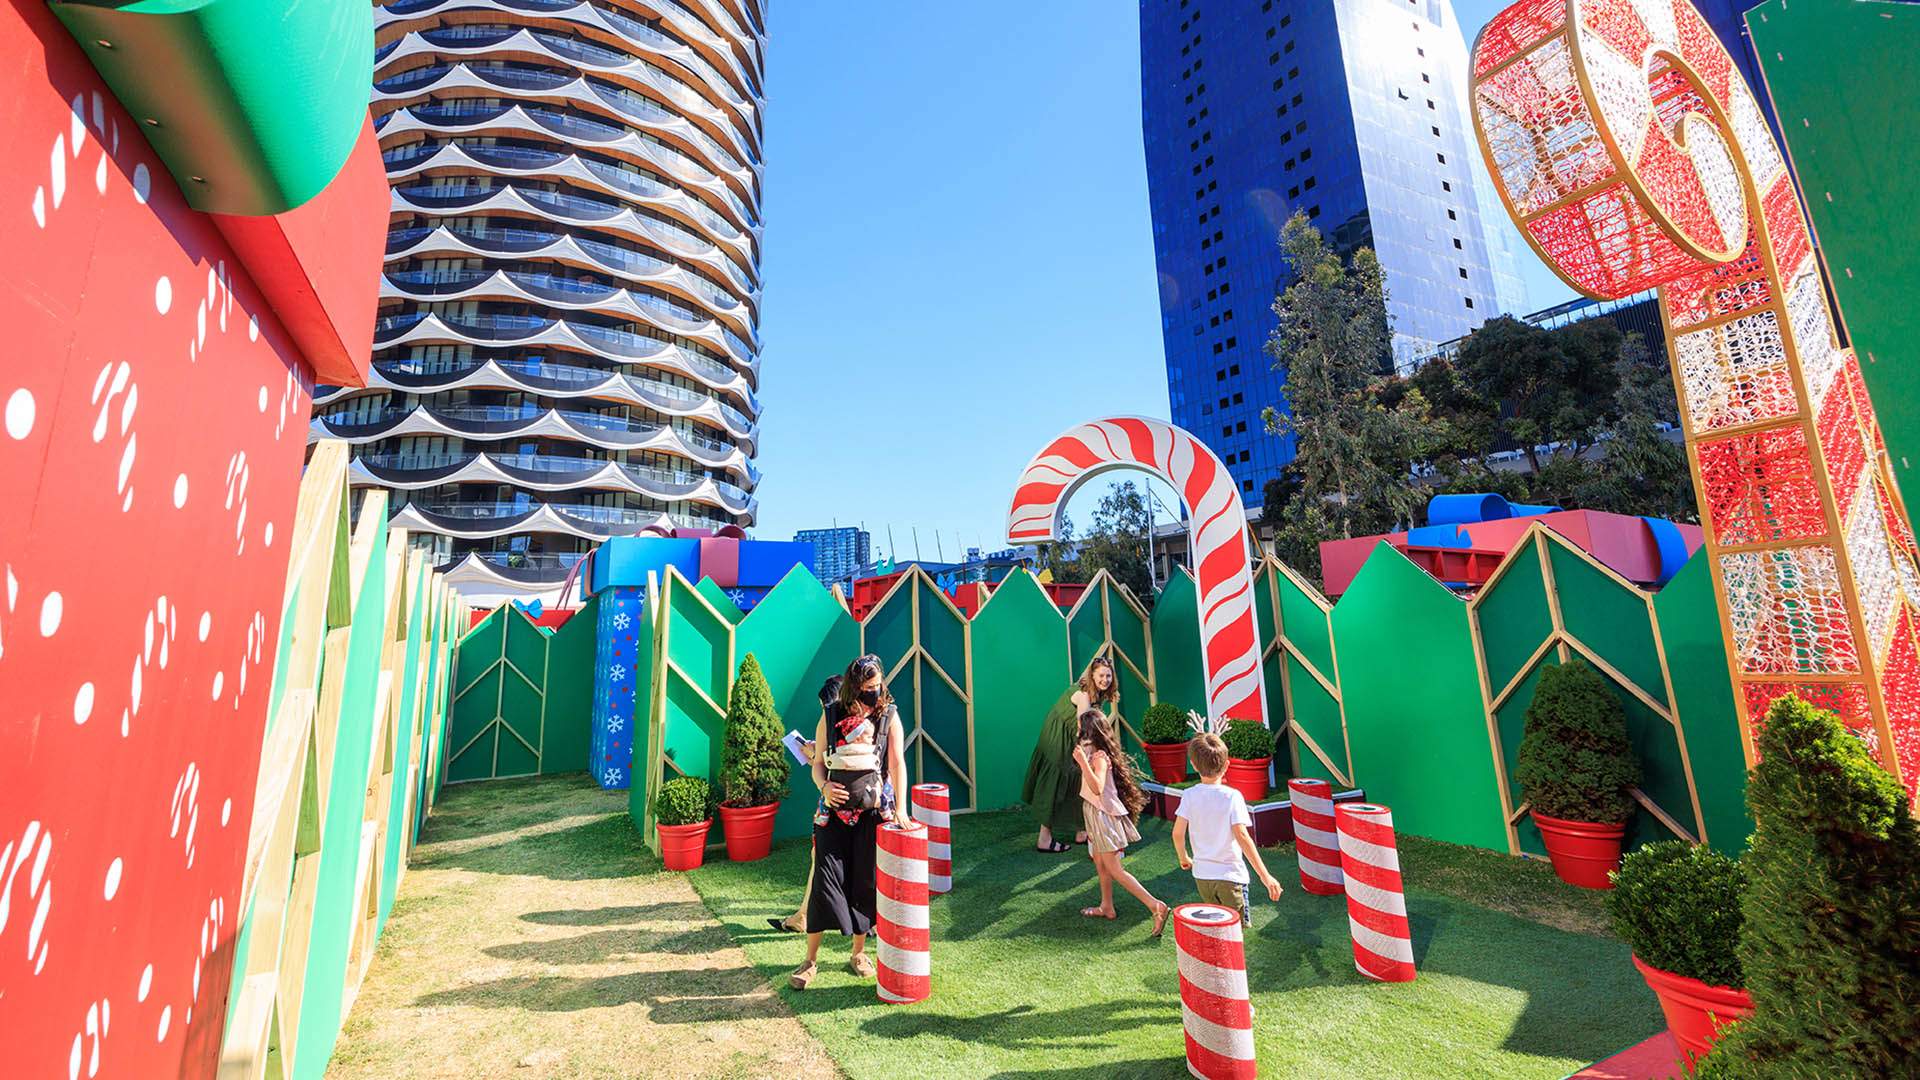 Melbourne's Month-Long Christmas Festival Is Back with Markets, Mazes, Rollerskating and Dazzling Decorations